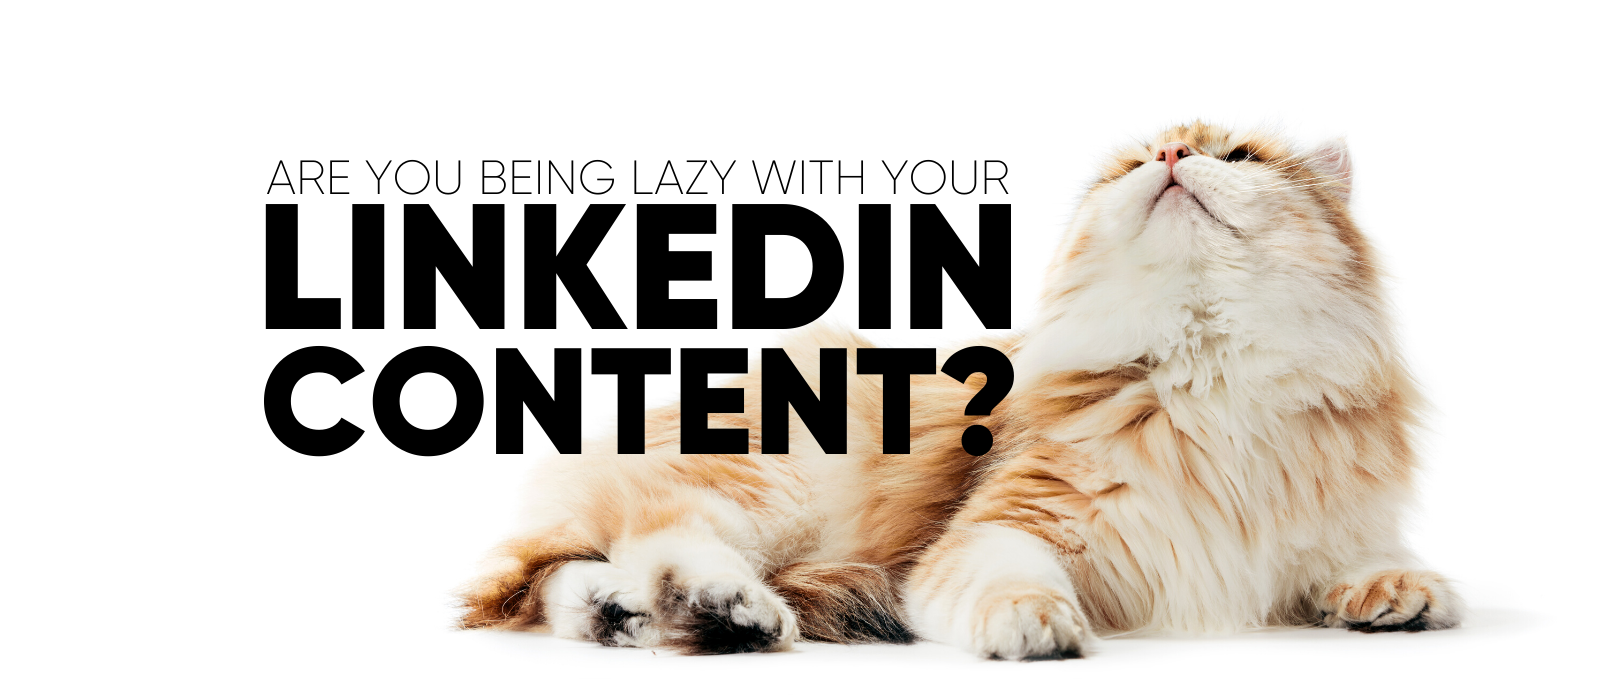 Are You Being Lazy with Your LinkedIn Content? - Oechsli